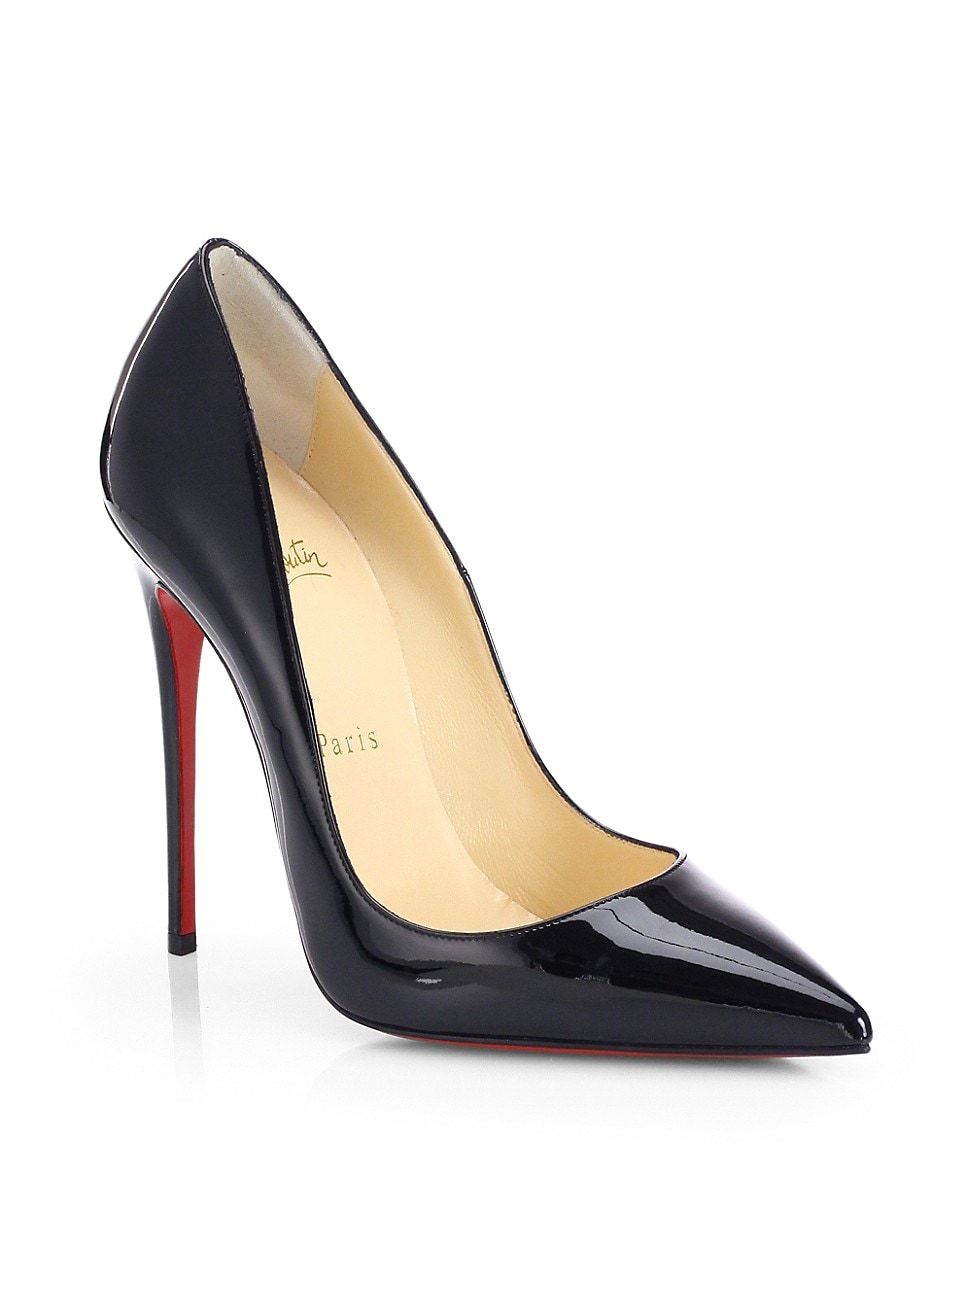 Christian Louboutin So Kate 120 Patent Leather Pumps | Saks Fifth Avenue